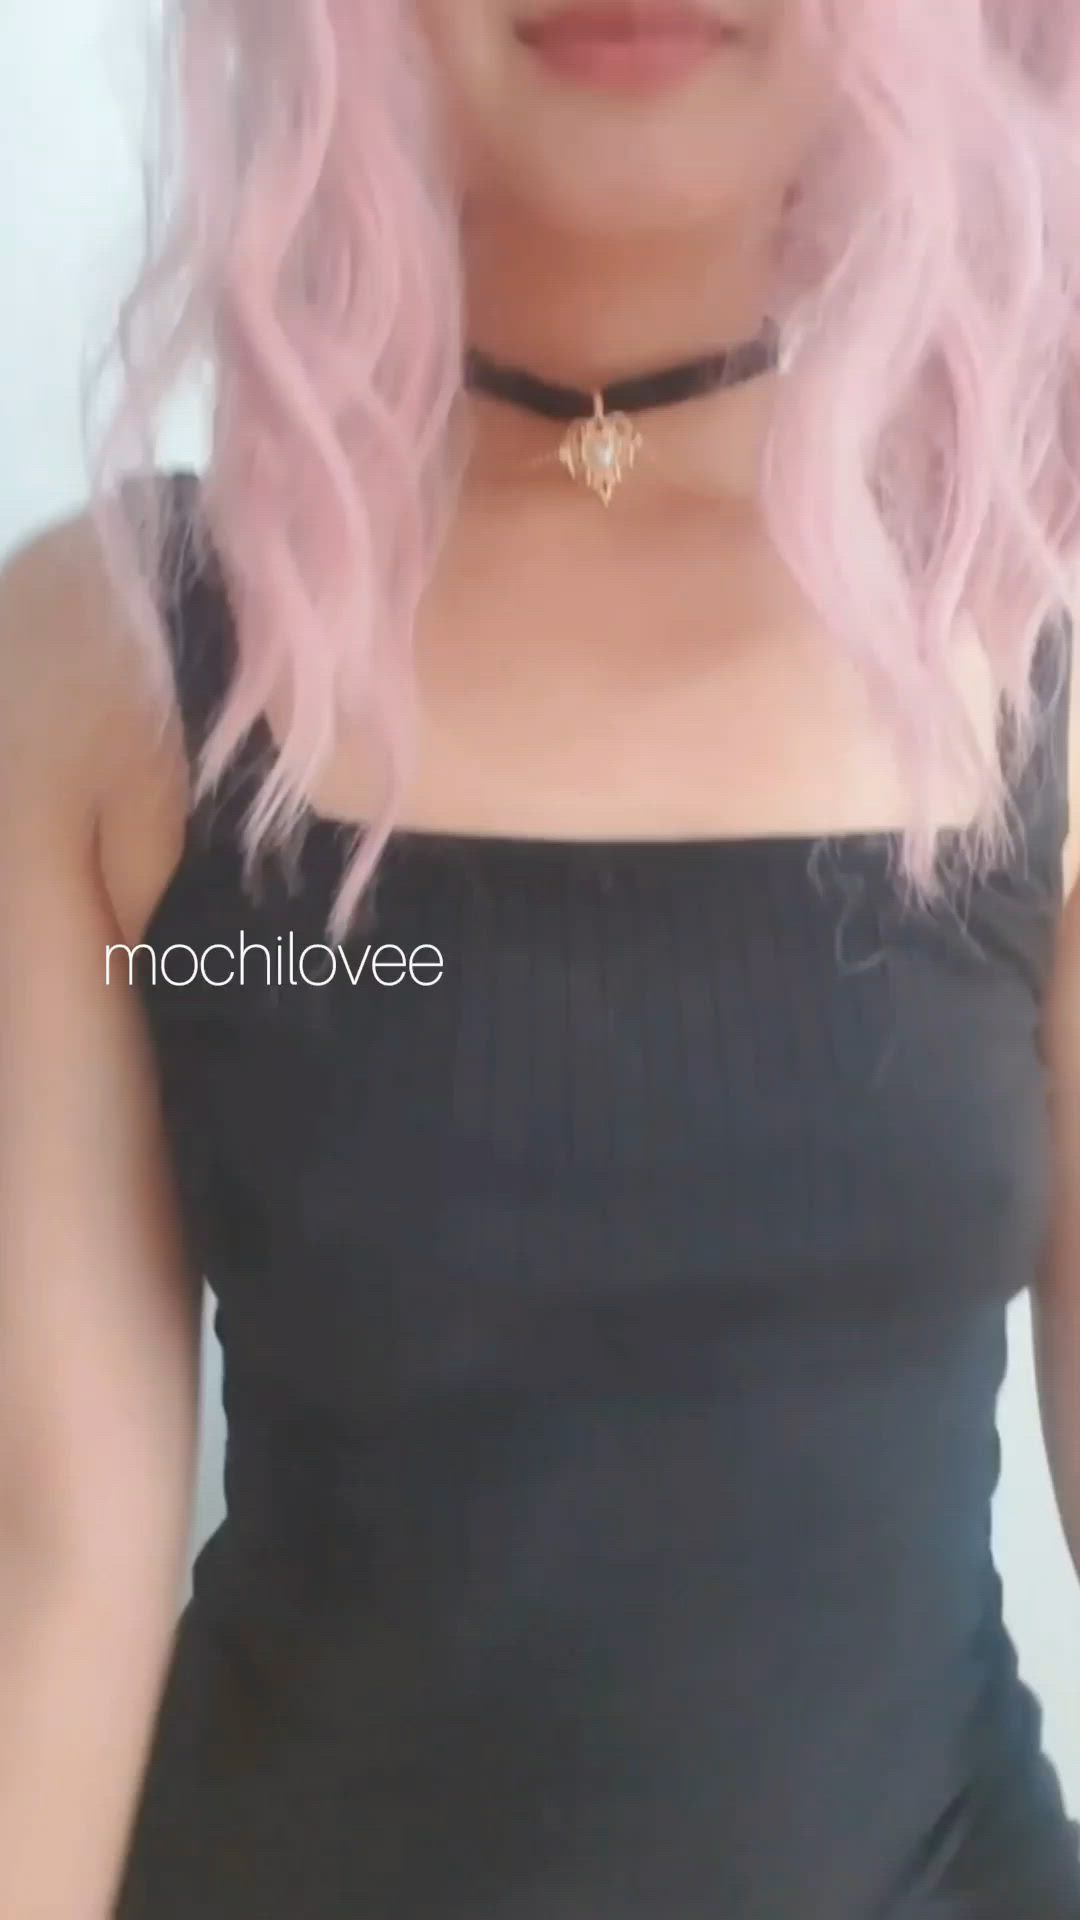 Asian porn video with onlyfans model  <strong>@mochilovee</strong>